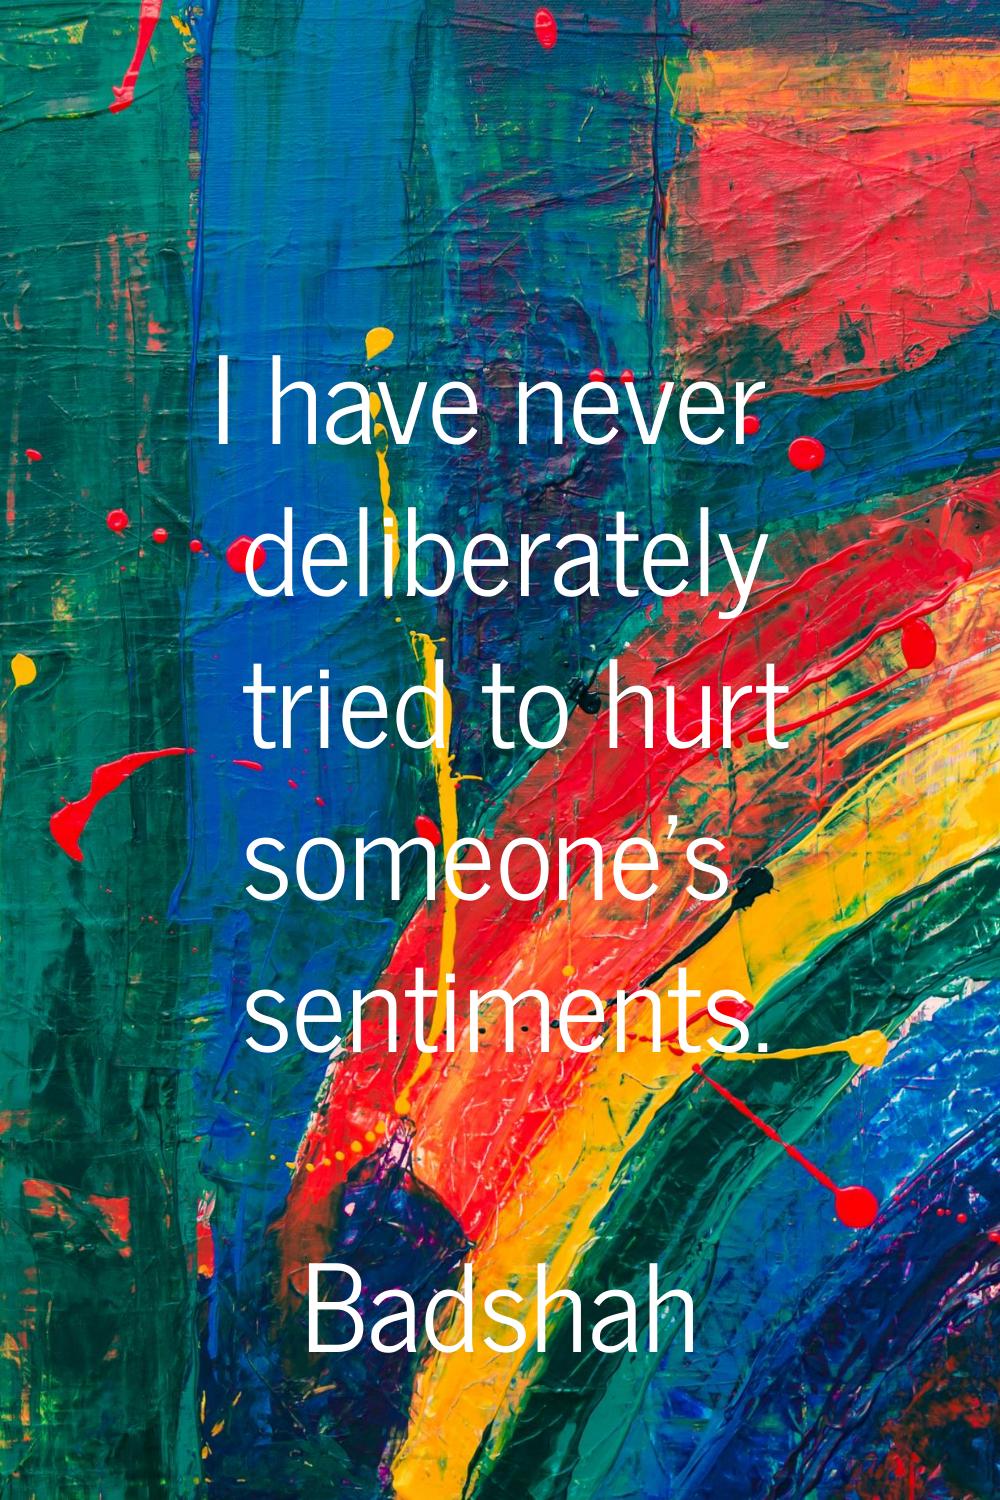 I have never deliberately tried to hurt someone's sentiments.